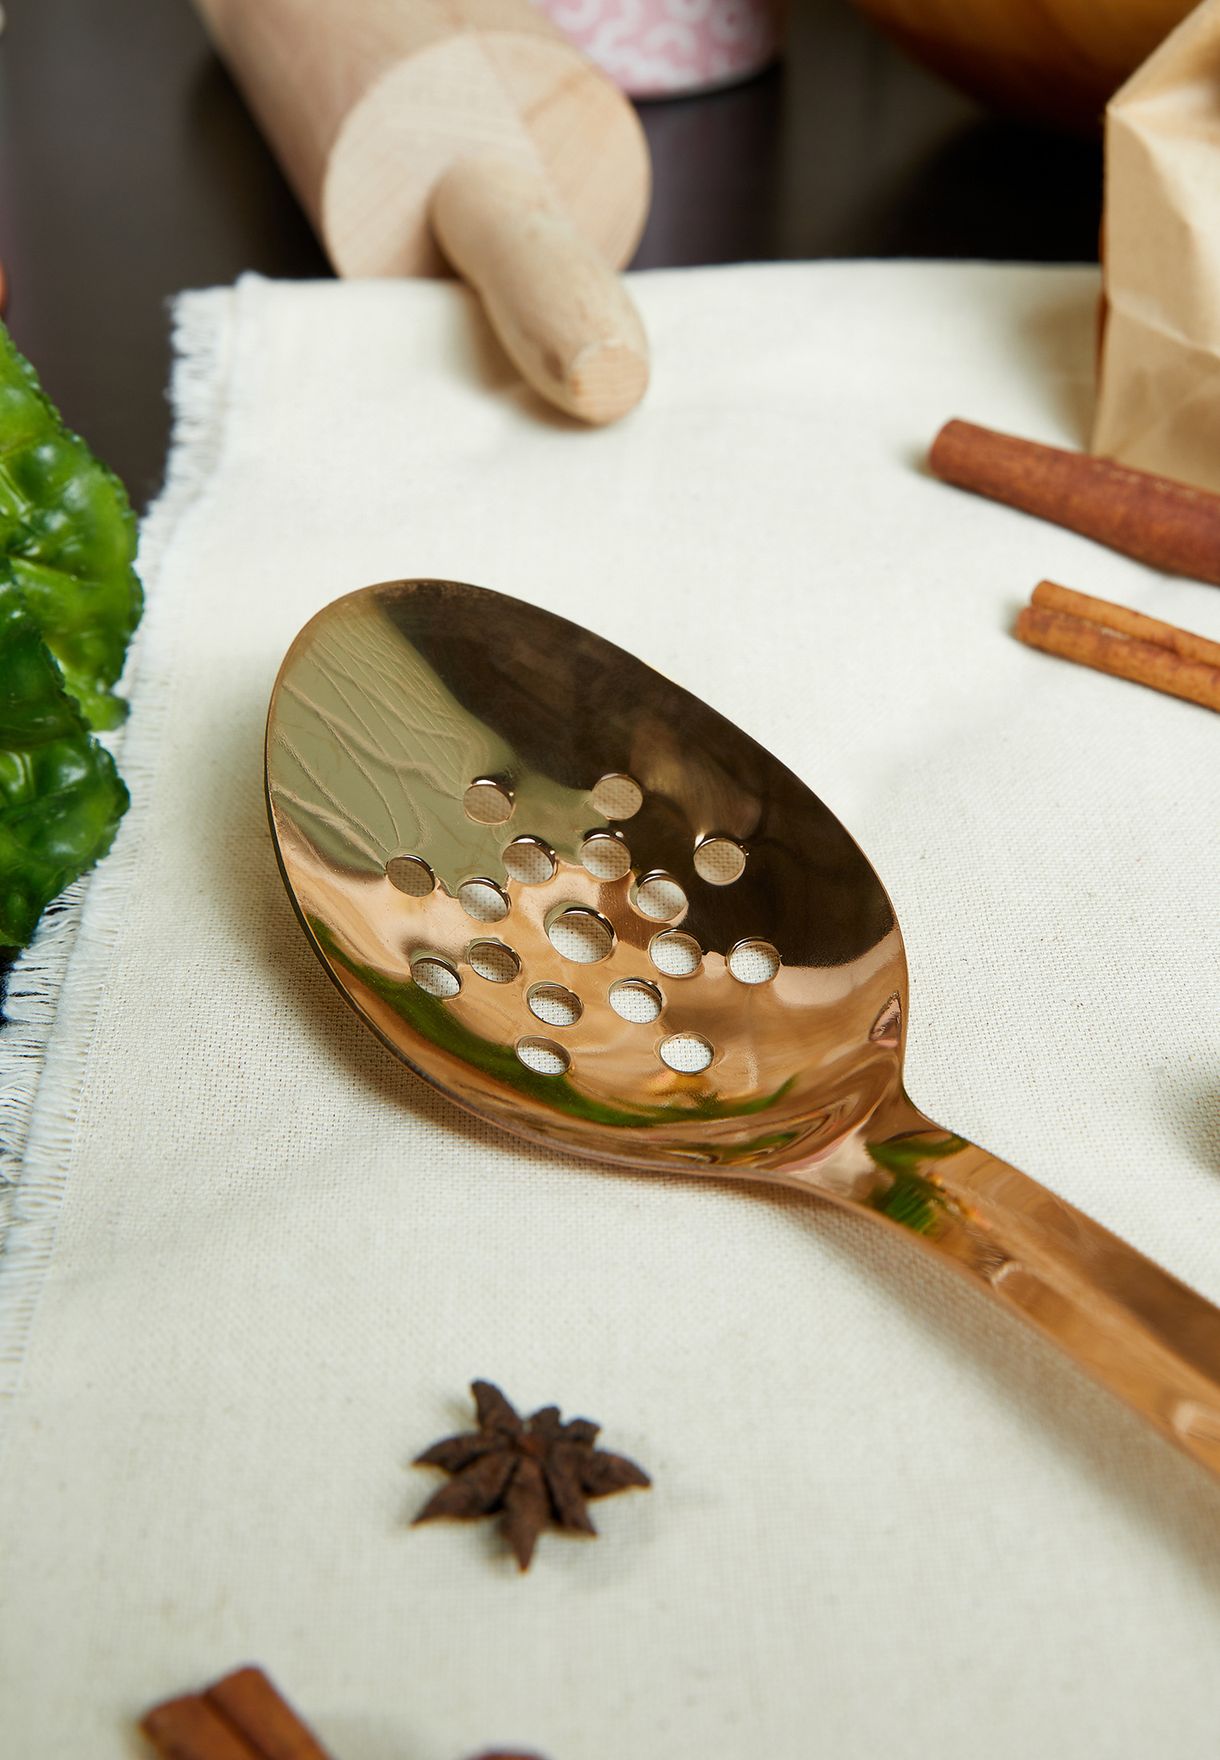 Freya Stainless Steel Rose Gold Slotted Spoon